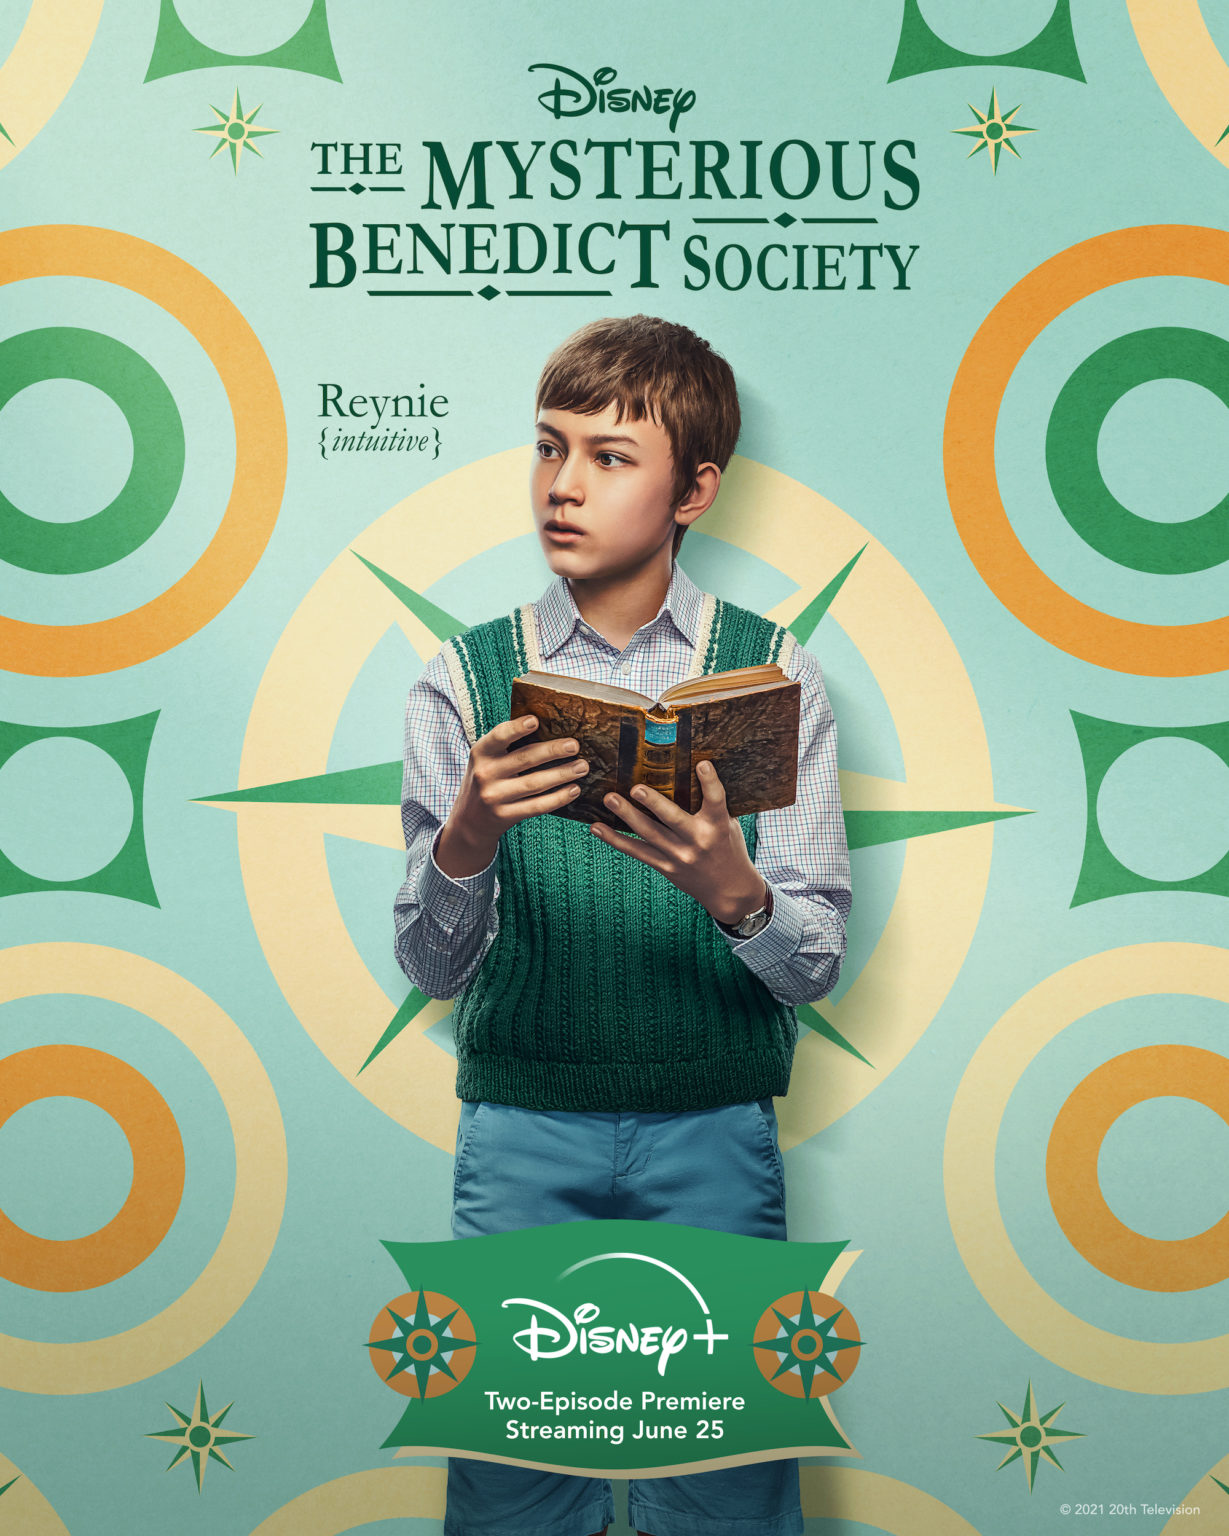 2 Episodes Of 'The Mysterious Benedict Society' Debuts Friday On Disney+